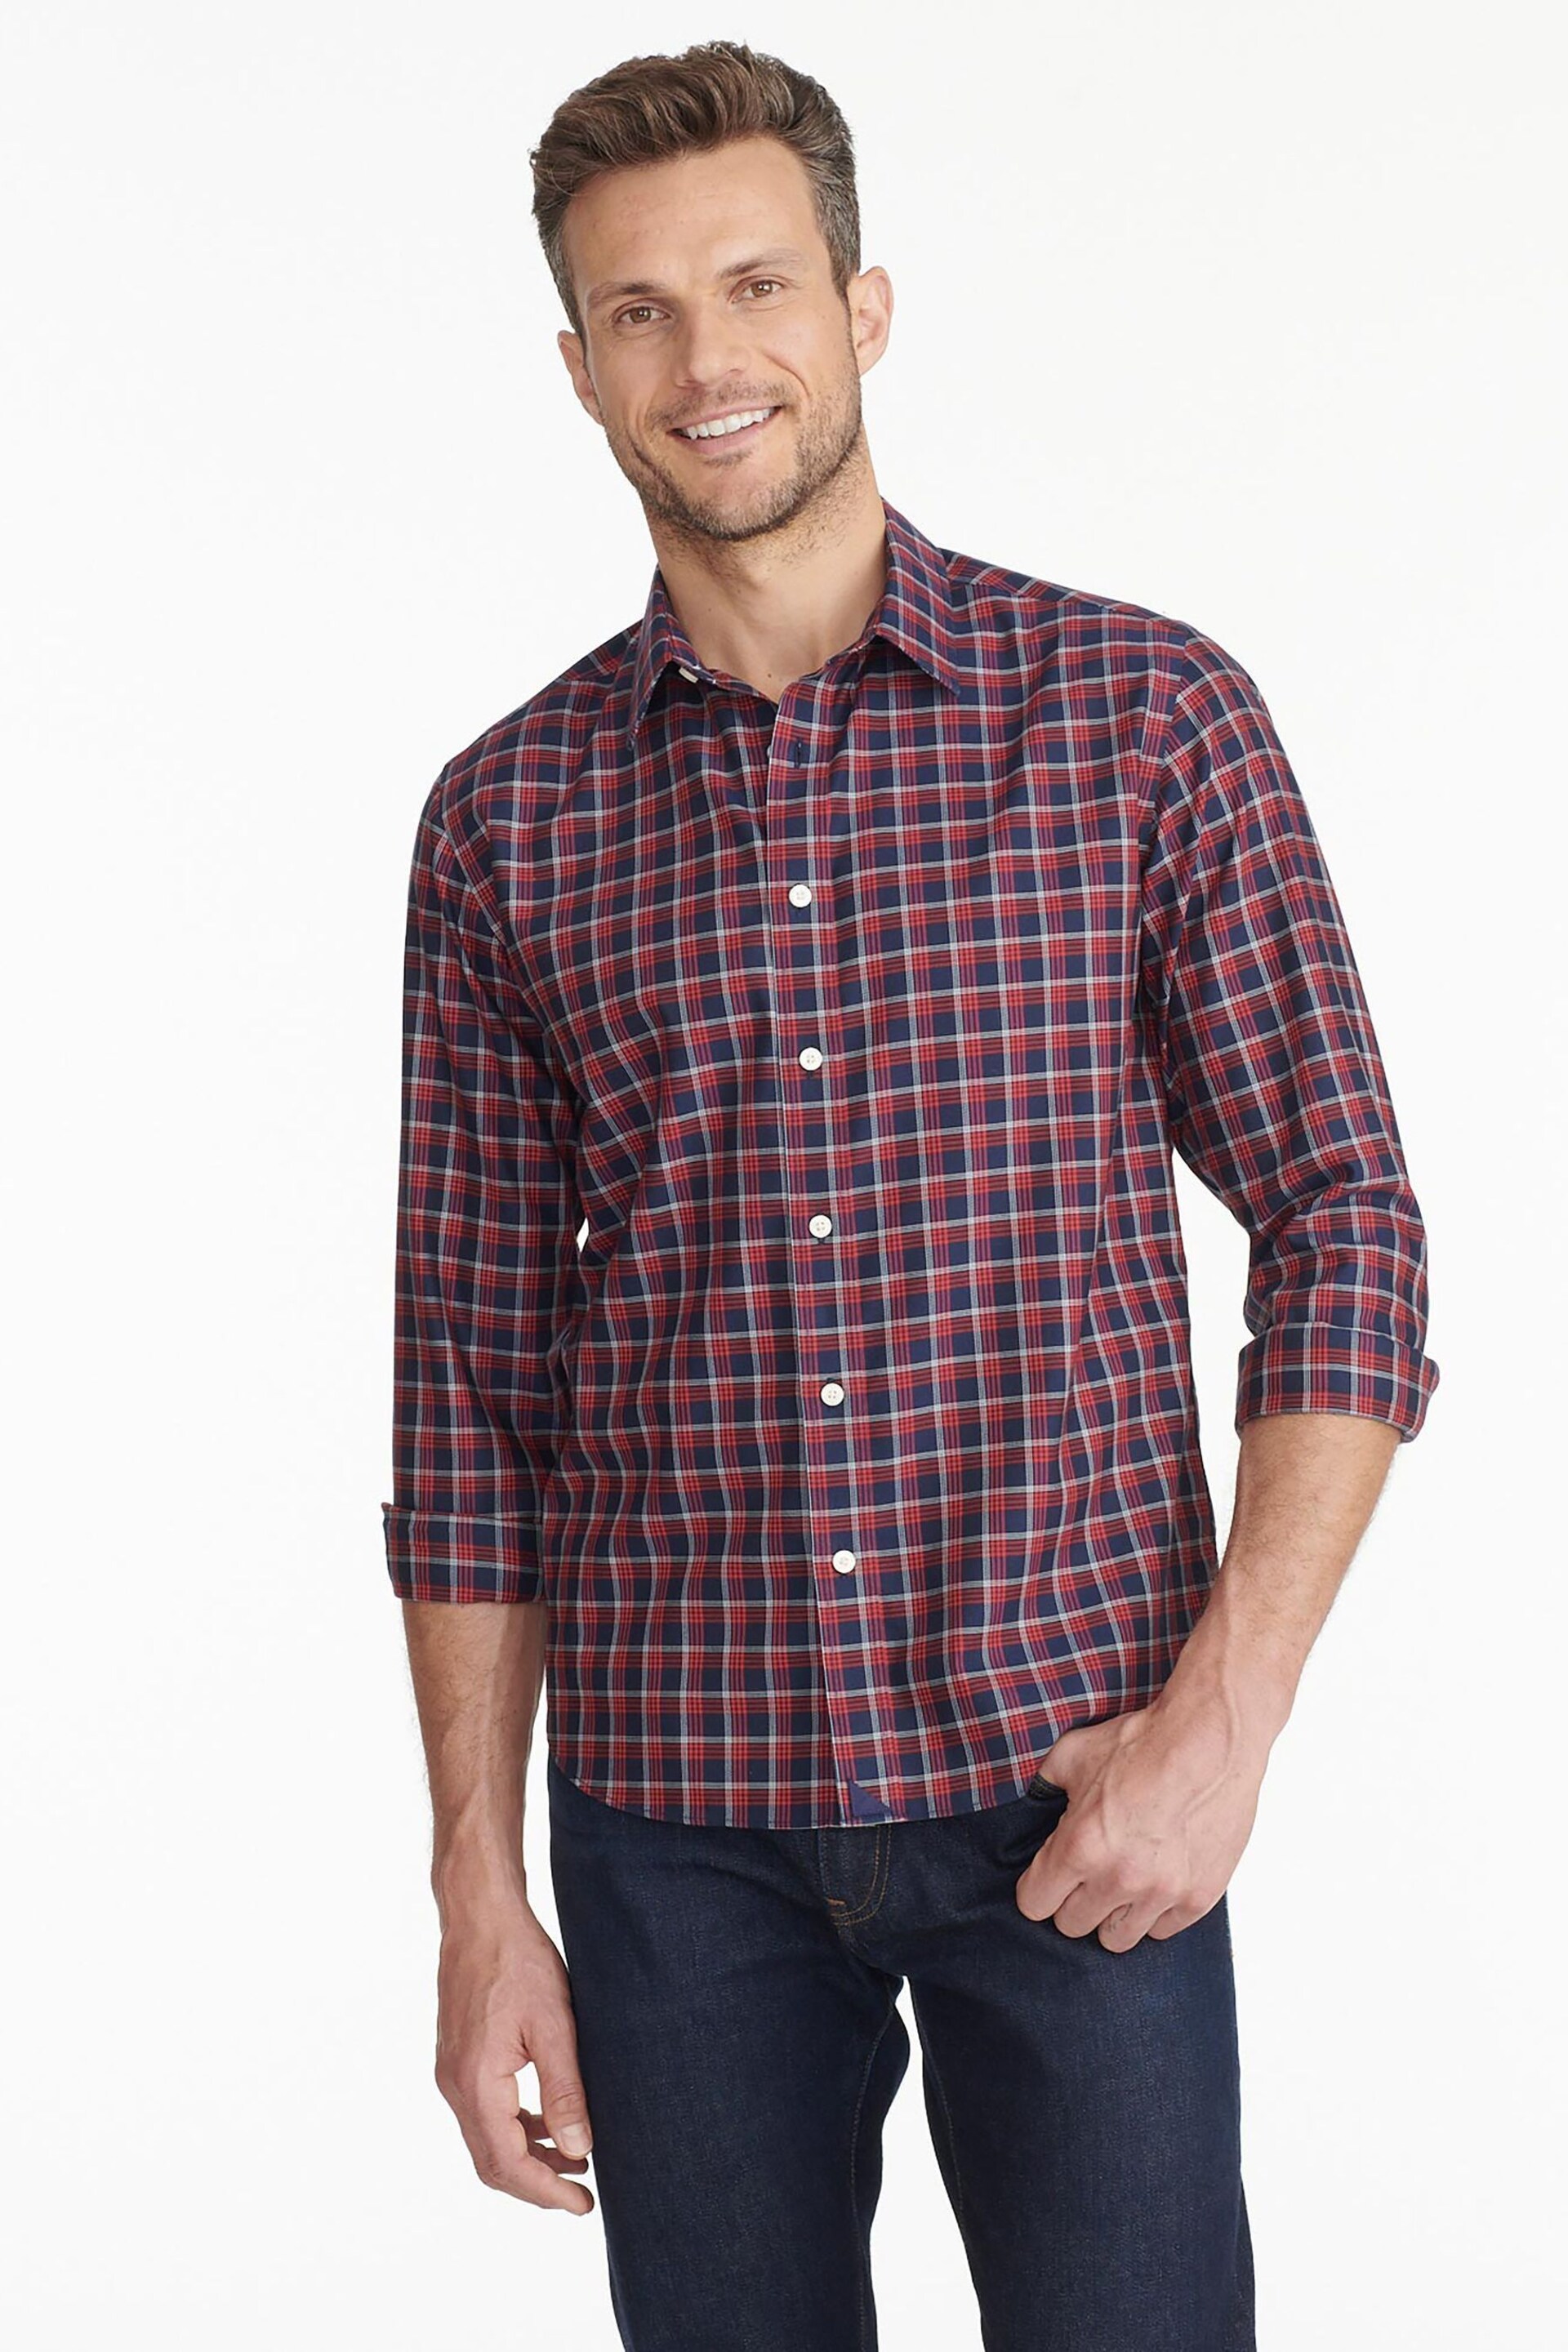 UNTUCKit Red/Blue Wrinkle-Free Slim Fit Cheny Shirt - Image 1 of 6